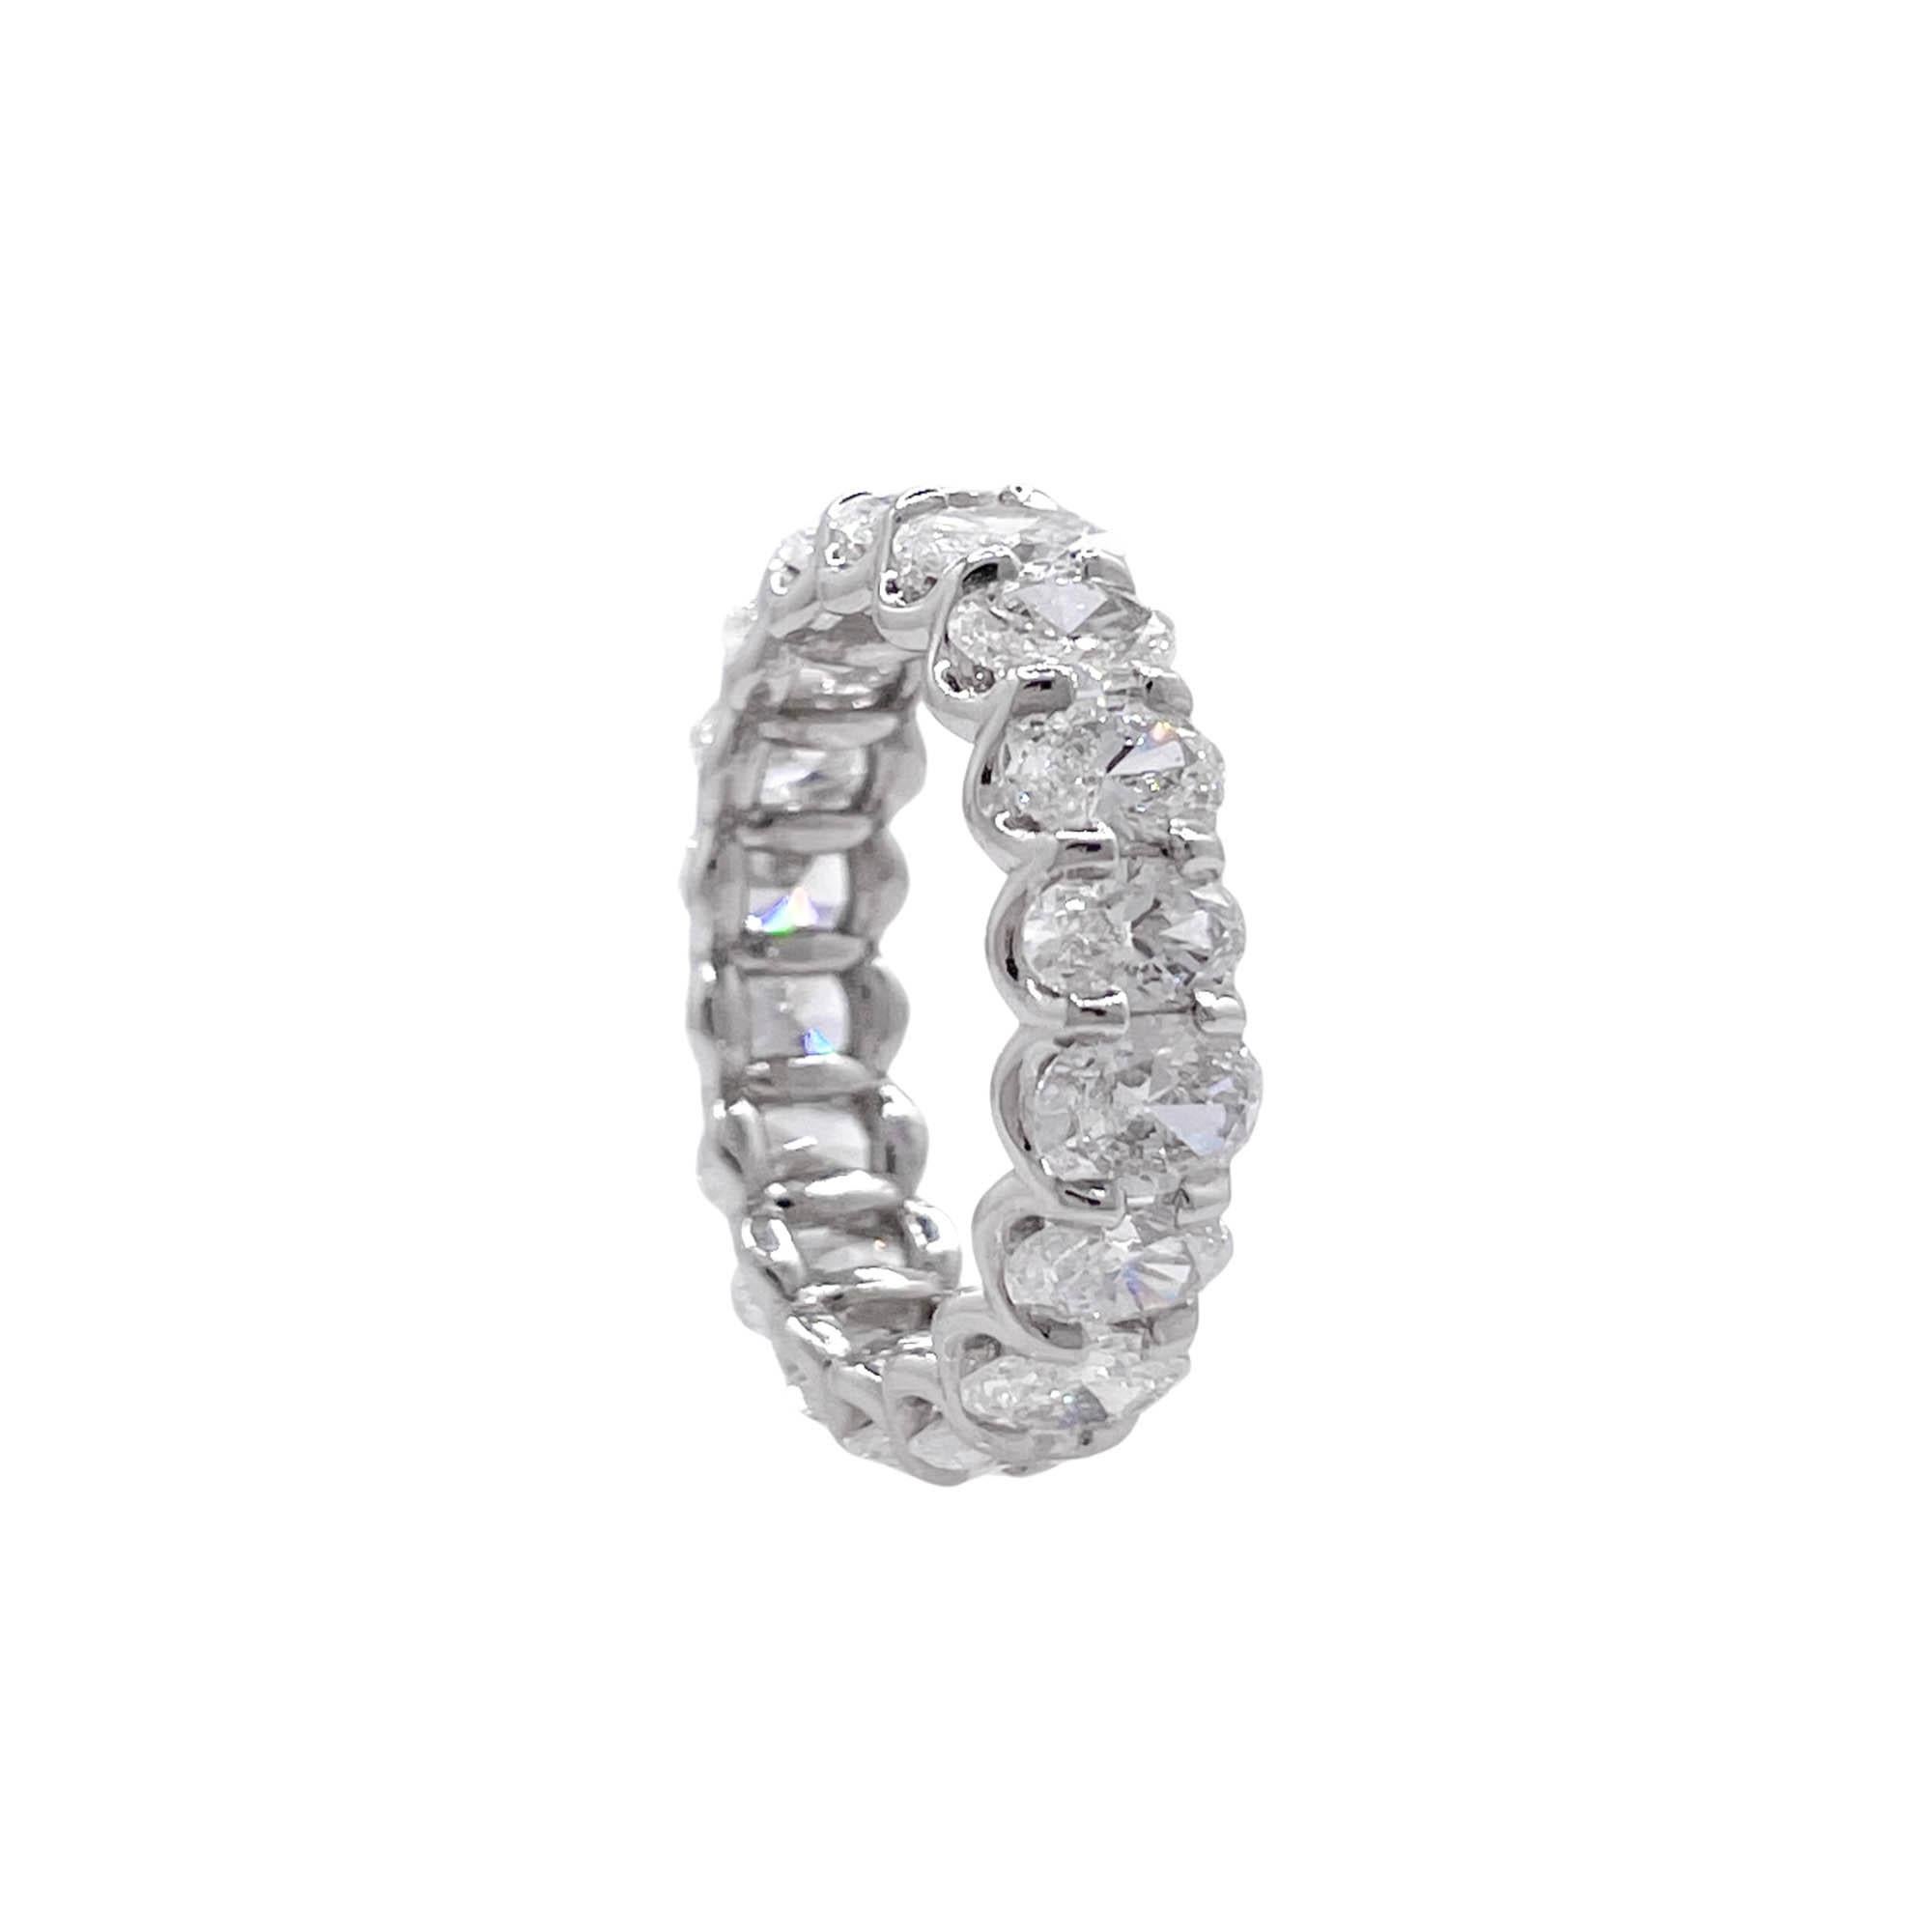 Jay Feder Platinum Oval Diamond Eternity Band Ring In Good Condition For Sale In Boca Raton, FL